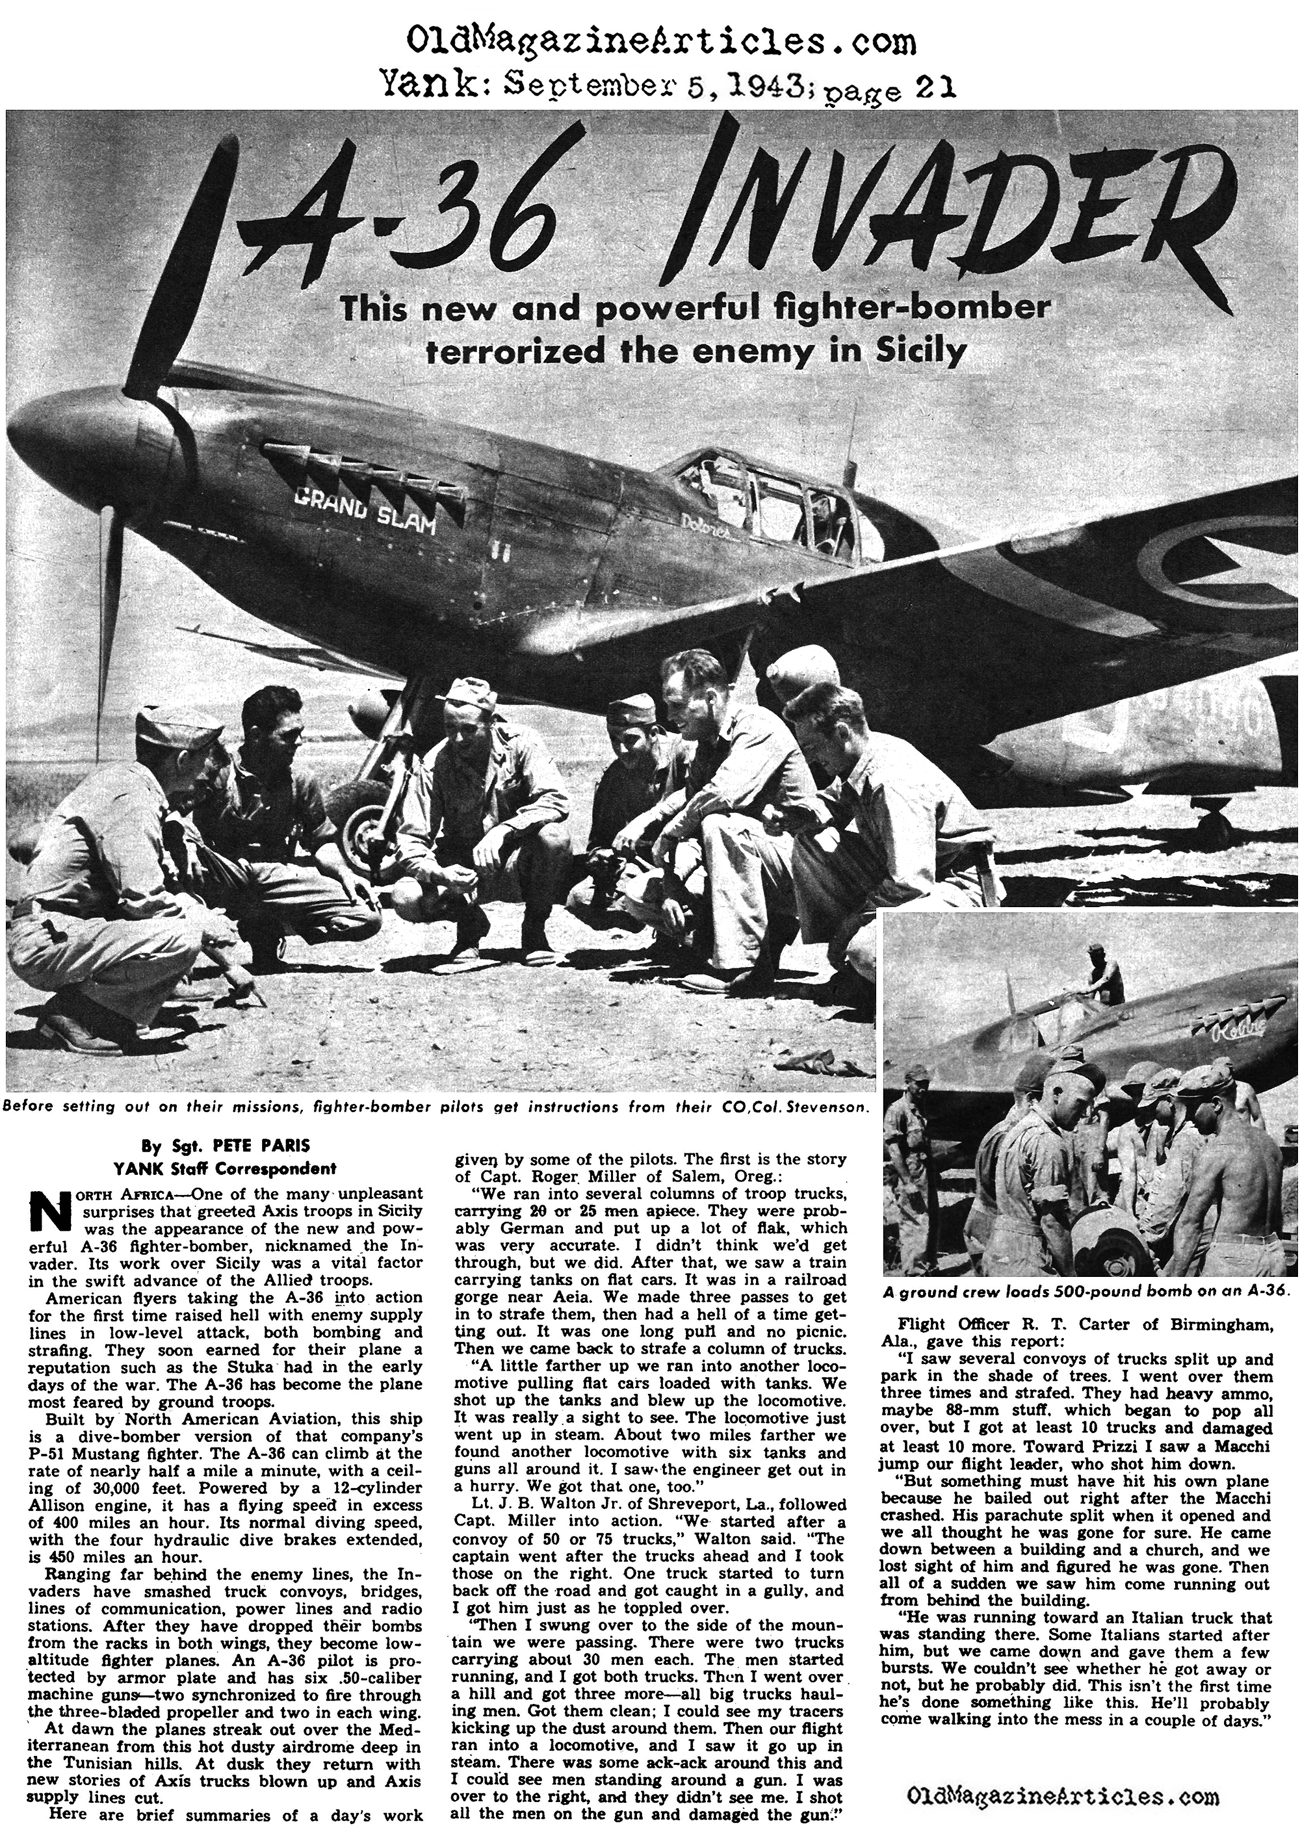 The American A-36 Fighter Bomber (Yank Magazine, 1943)